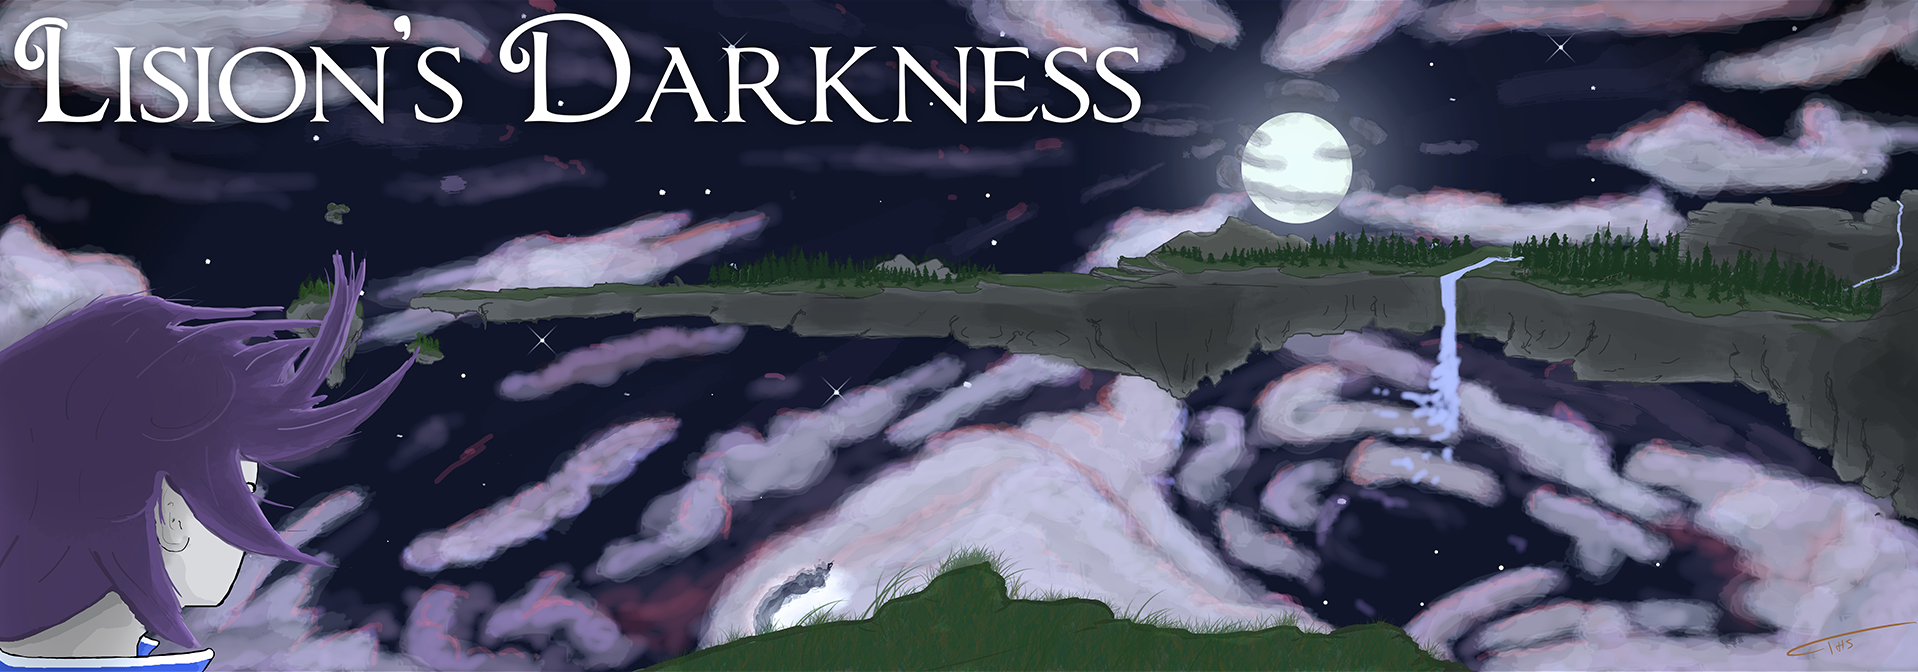 Lision's Darkness Game Banner of young man overlooking a cliff facing the moon